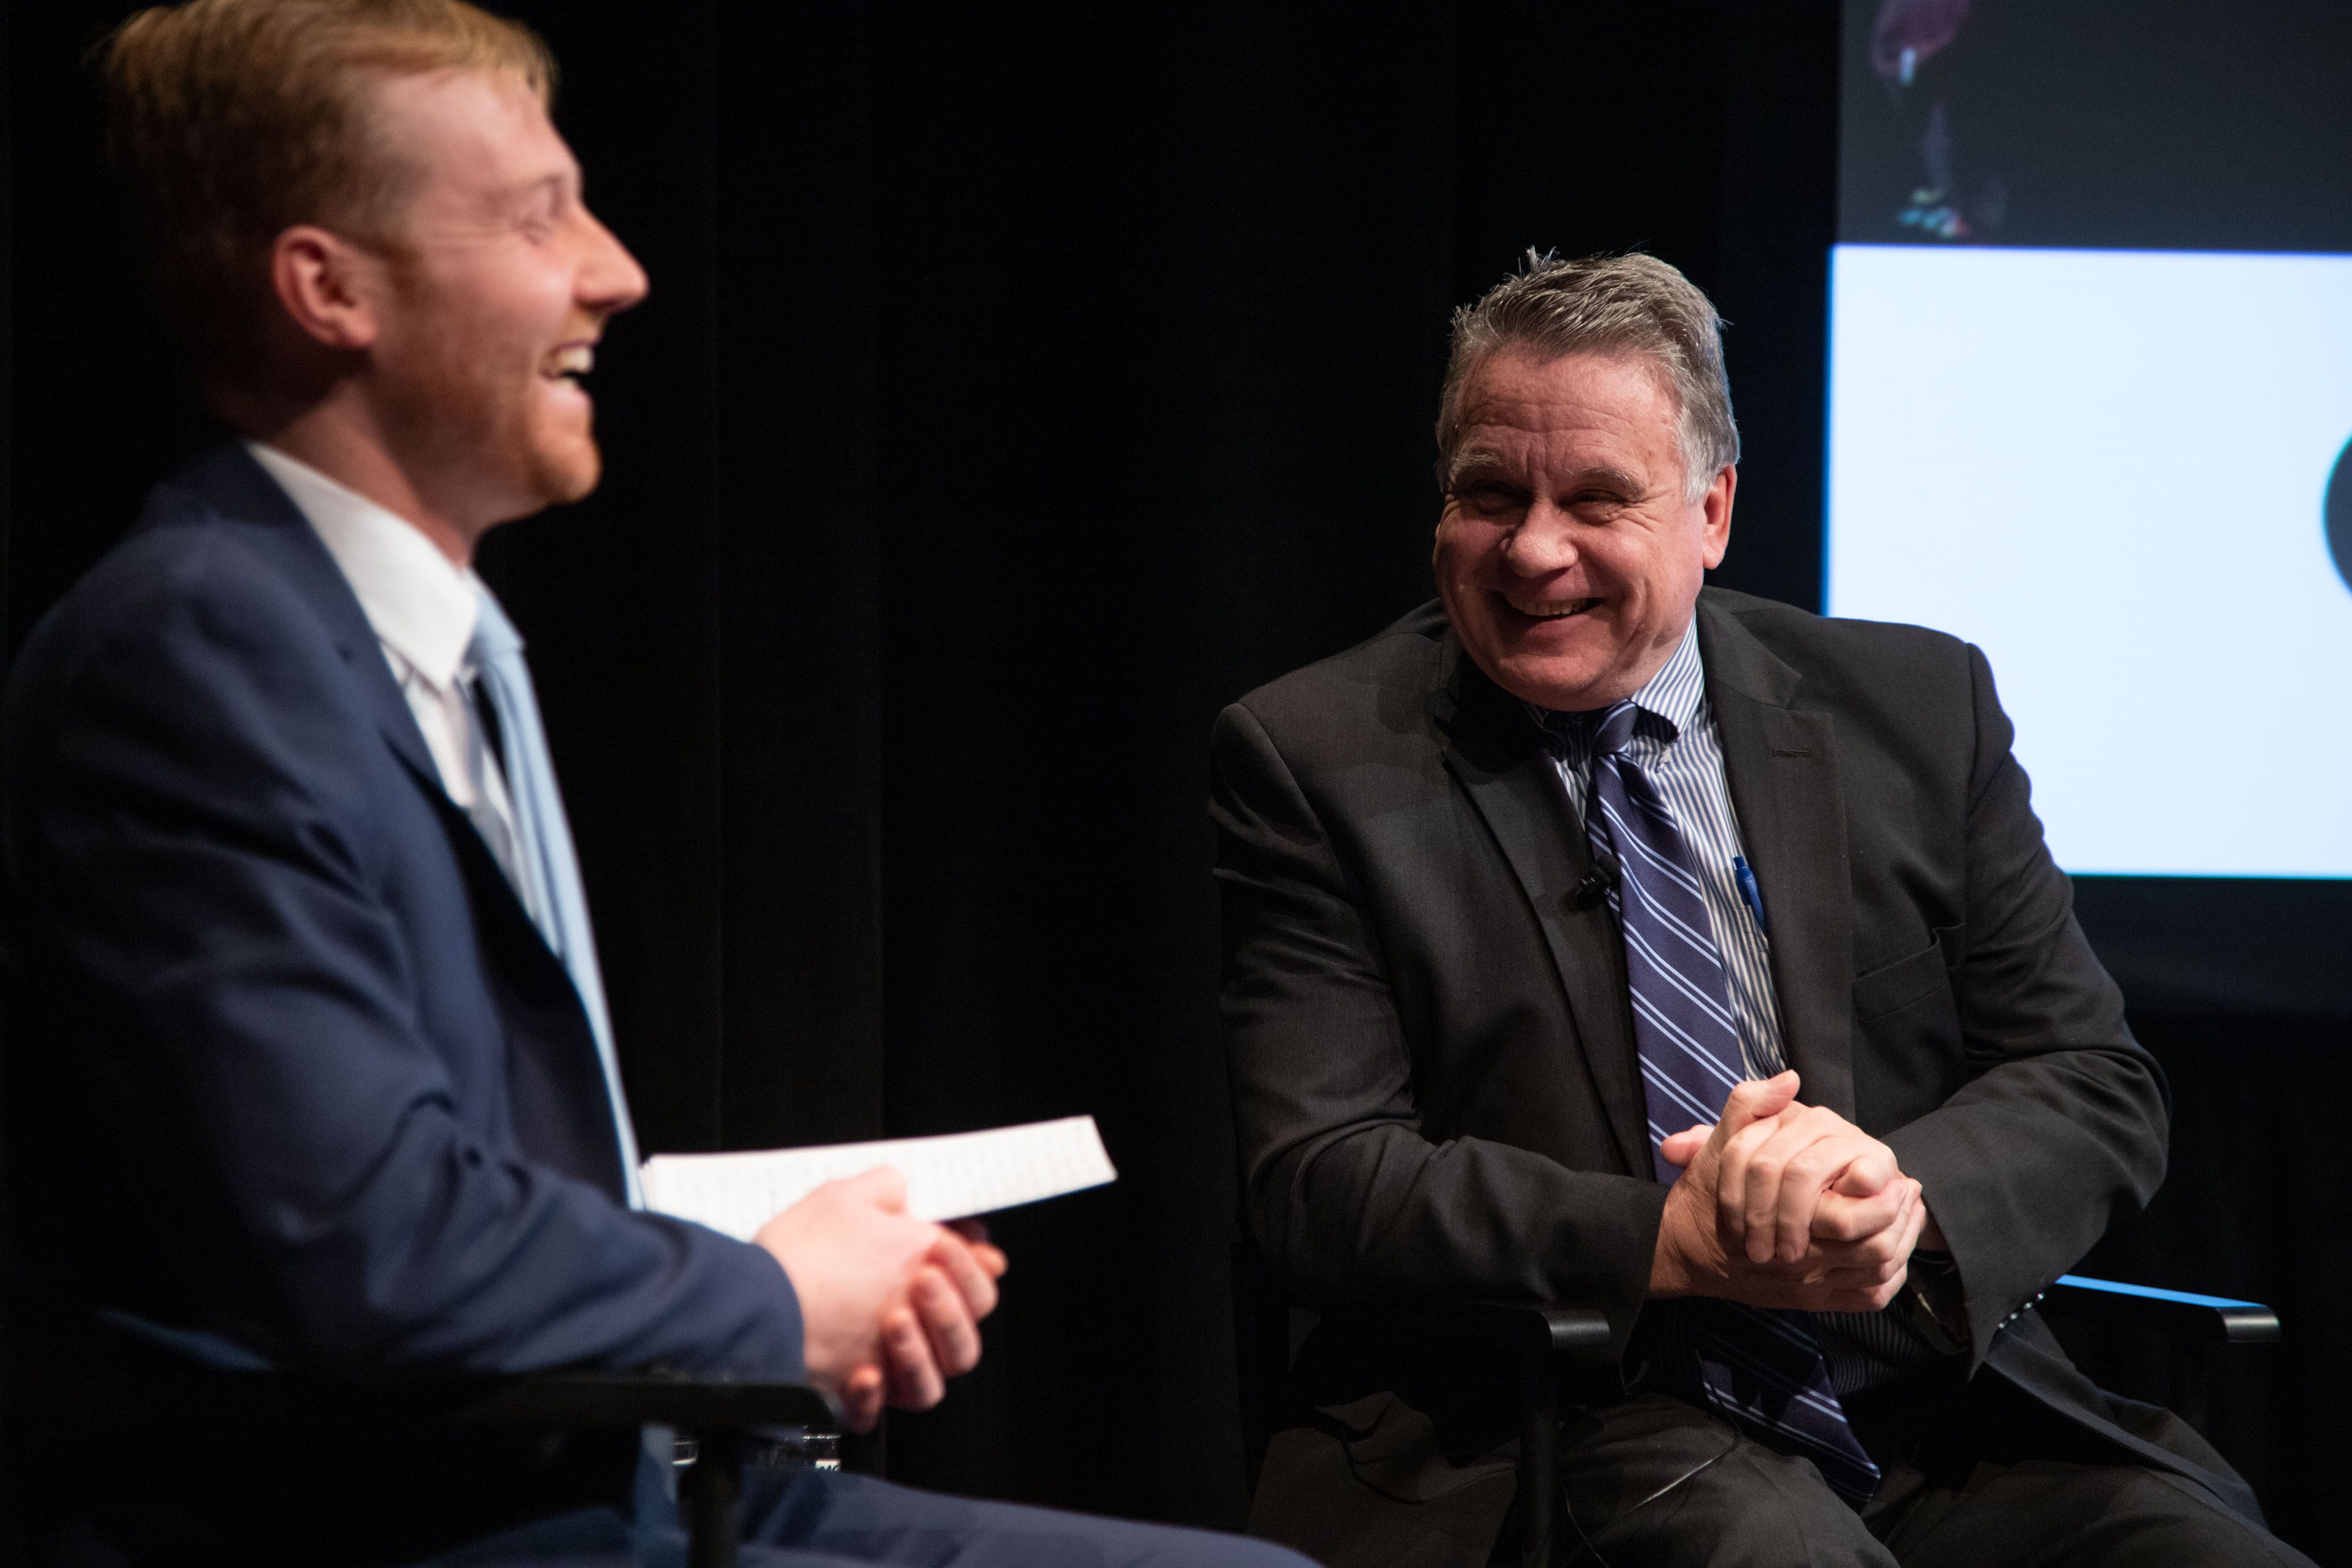 Rep. Chris Smith in conversation with Axios' Dave Lawler